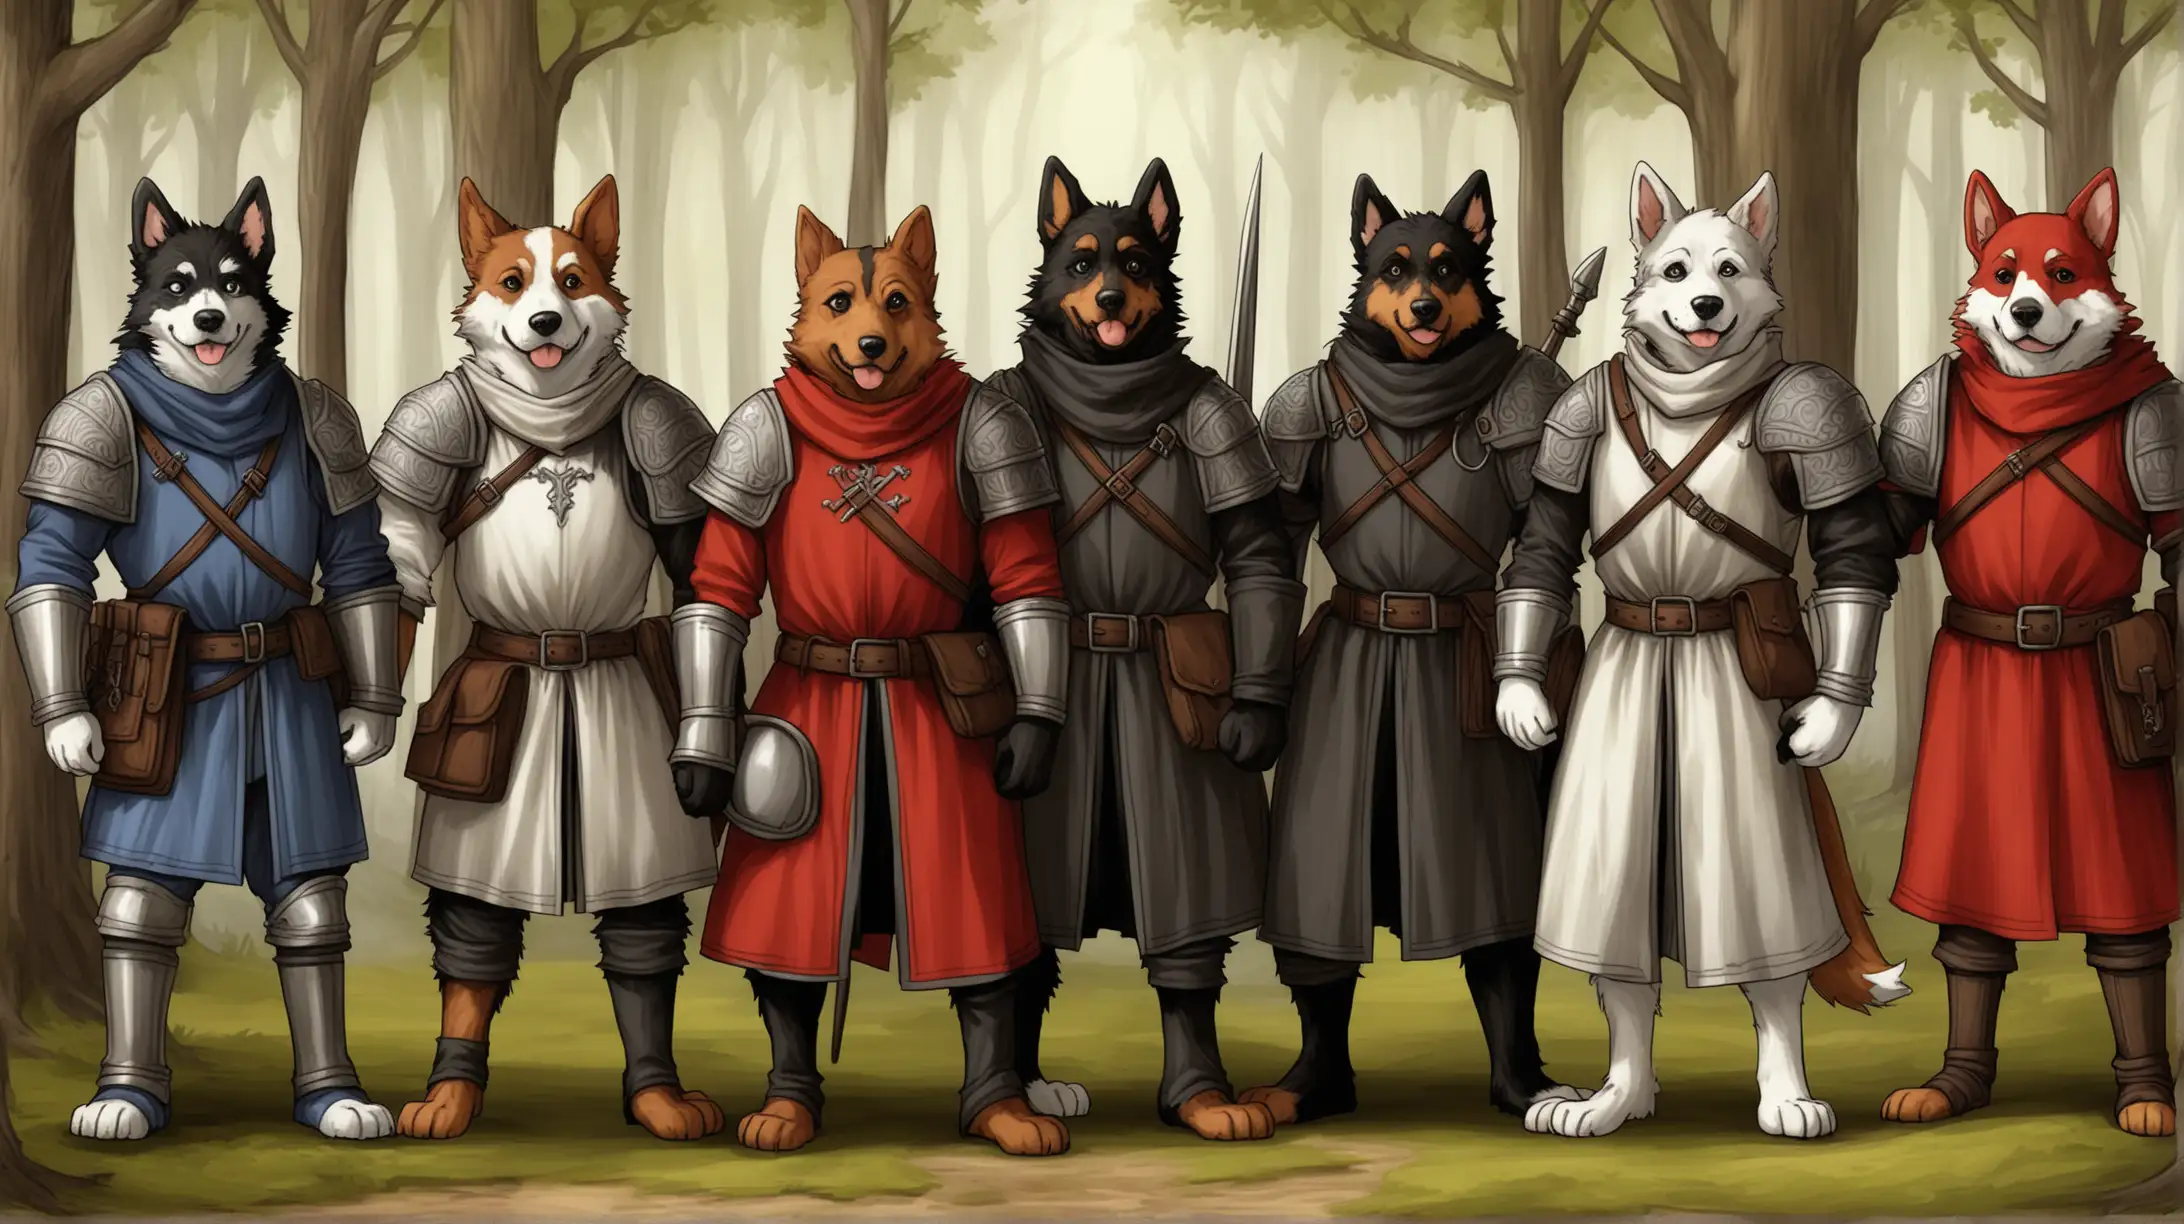 Medieval Fantasy Rangers and Guards in the Woods